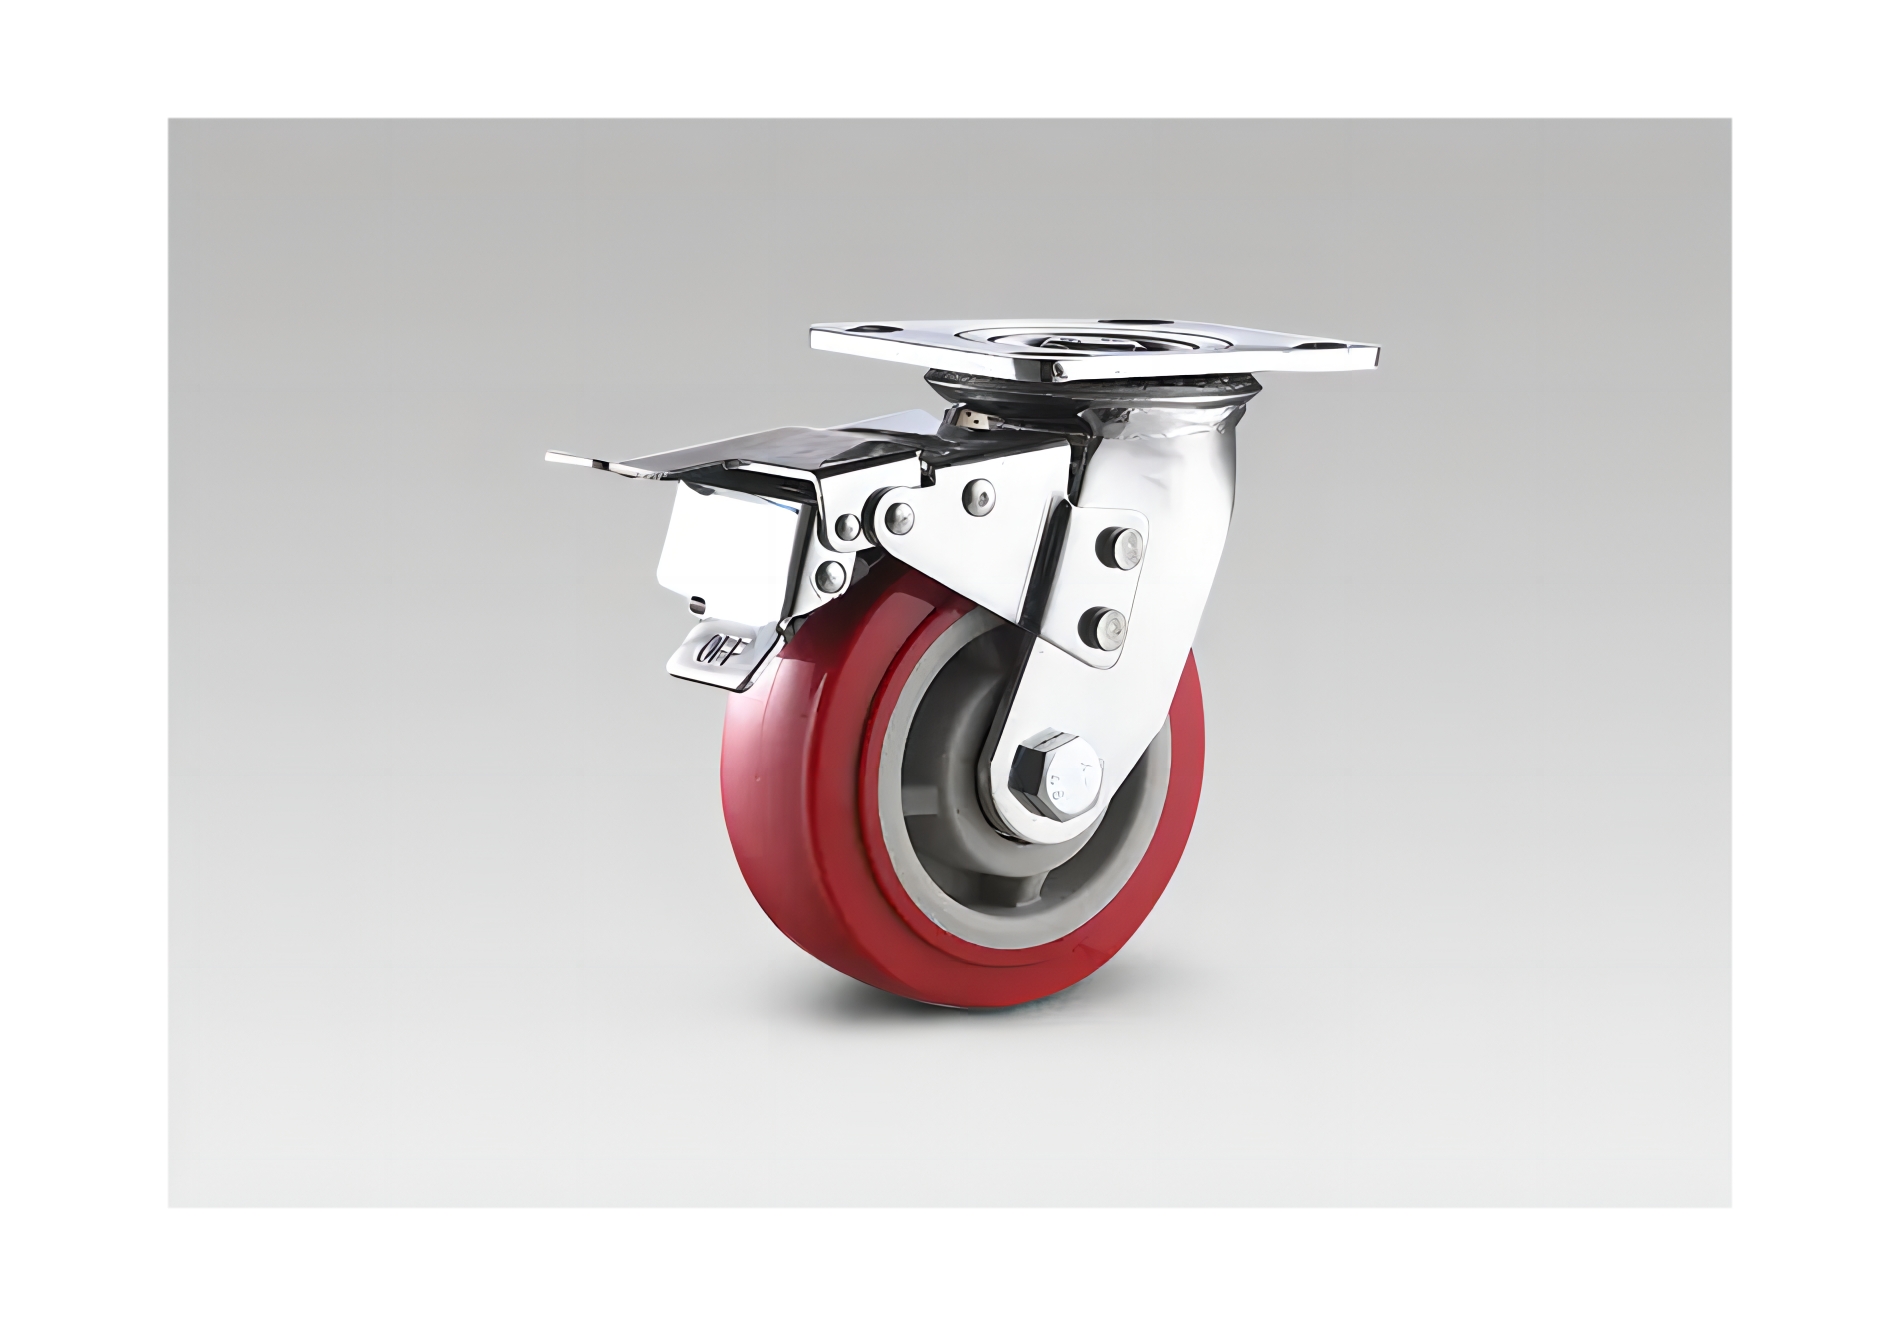 How to choose the right way to use heavy duty casters？